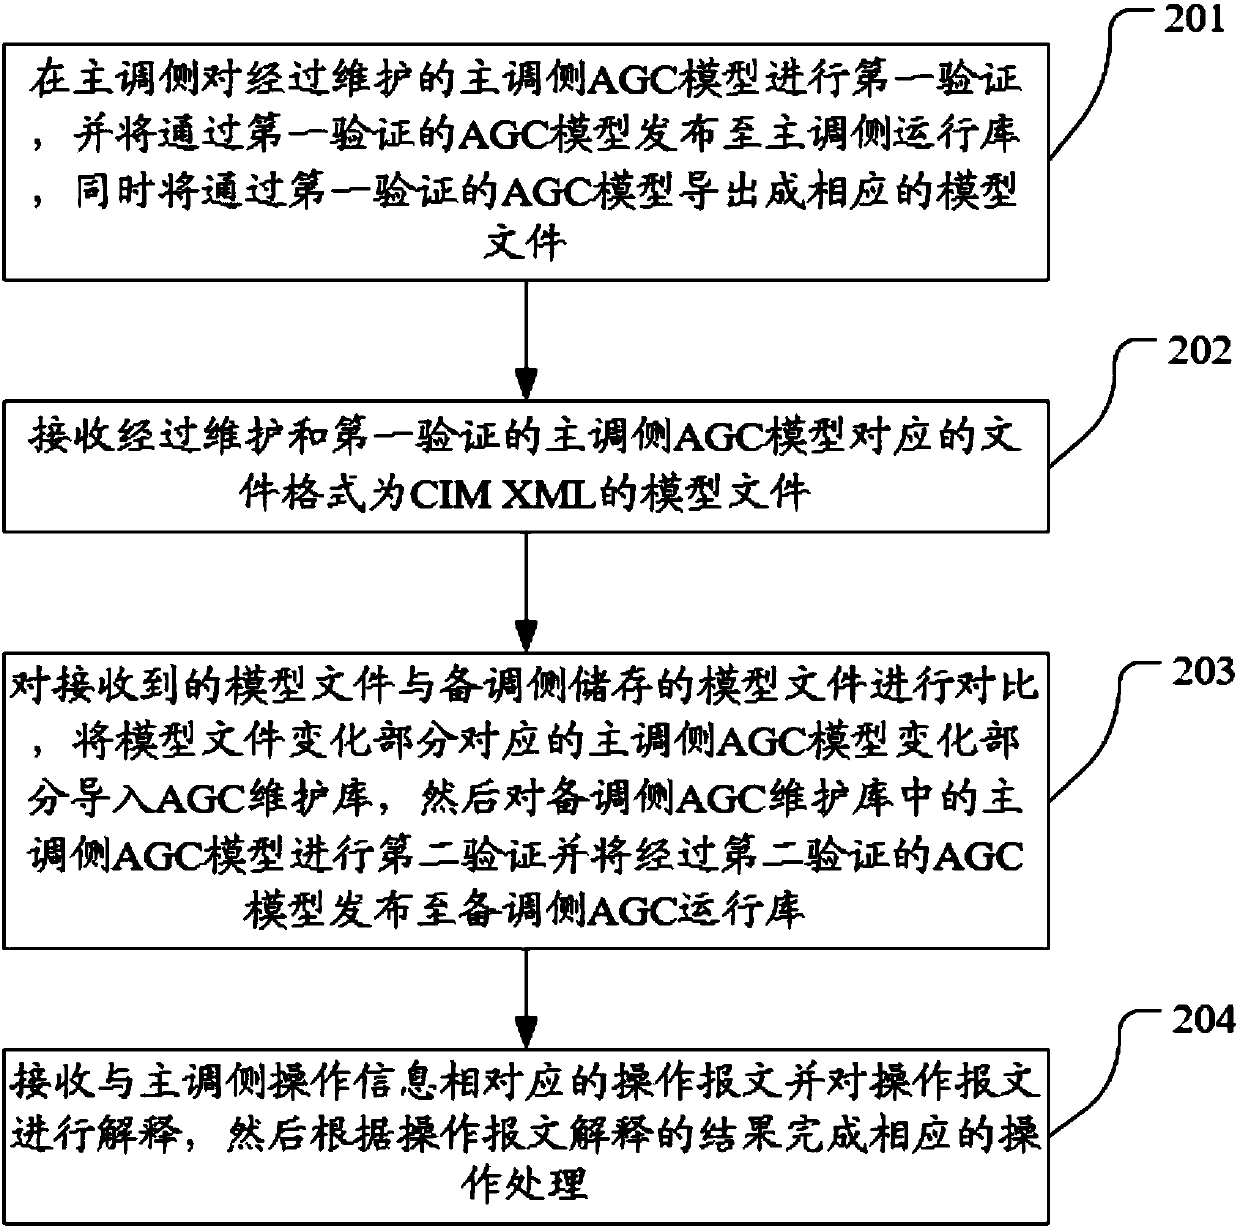 Automatic generation control (AGC) information synchronization method and system between heterogeneous scheduling automatic main and backup systems